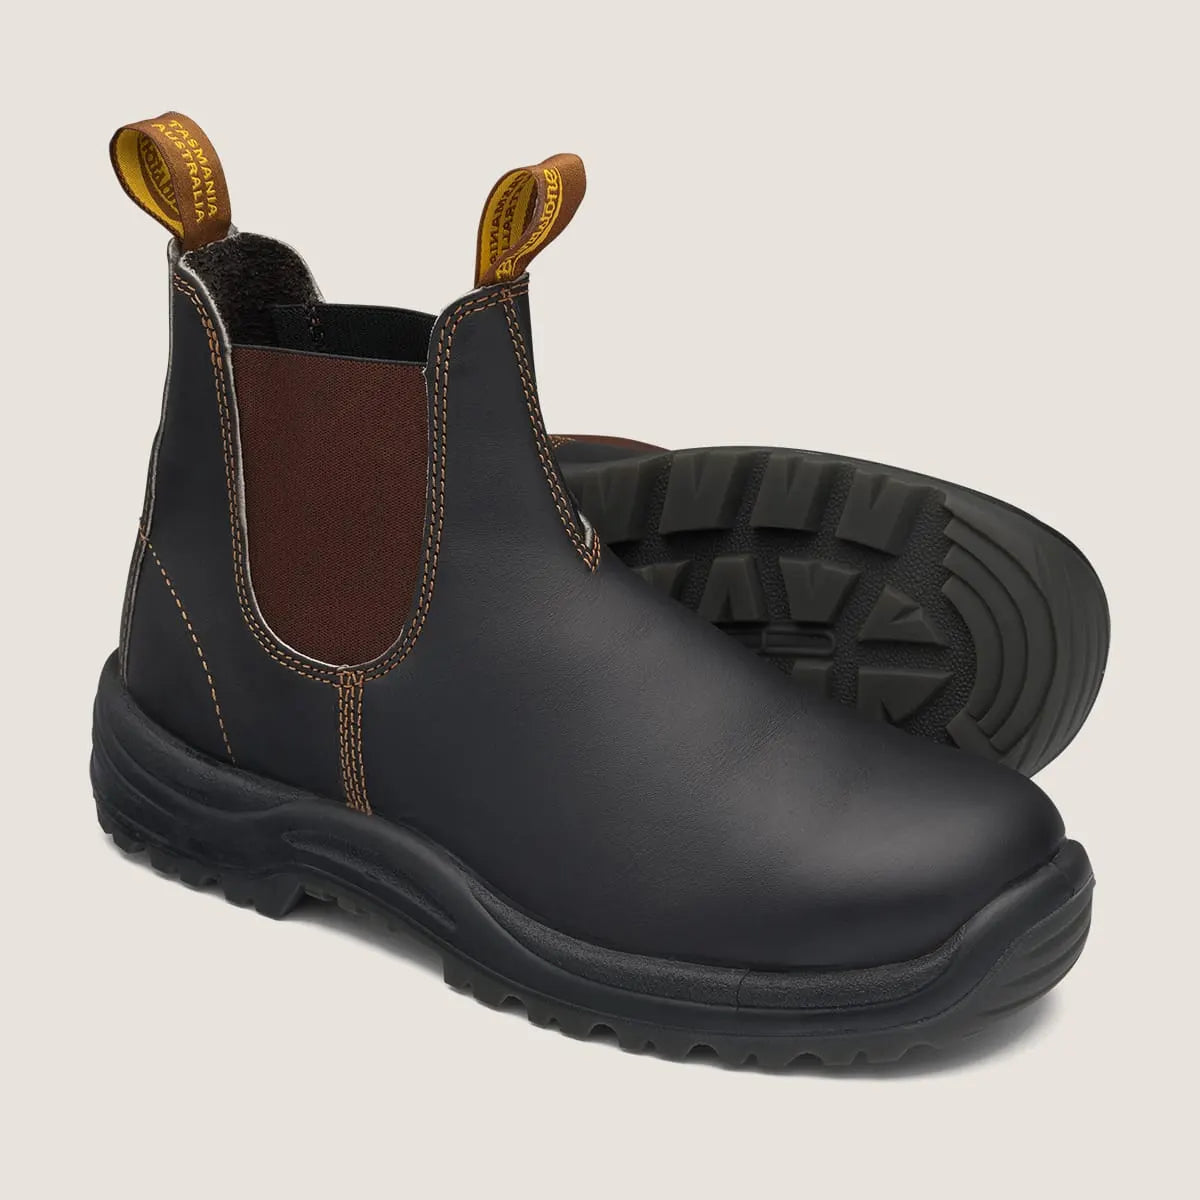 Blundstone 172 Safety Elastic Side Boots in Stout Brown